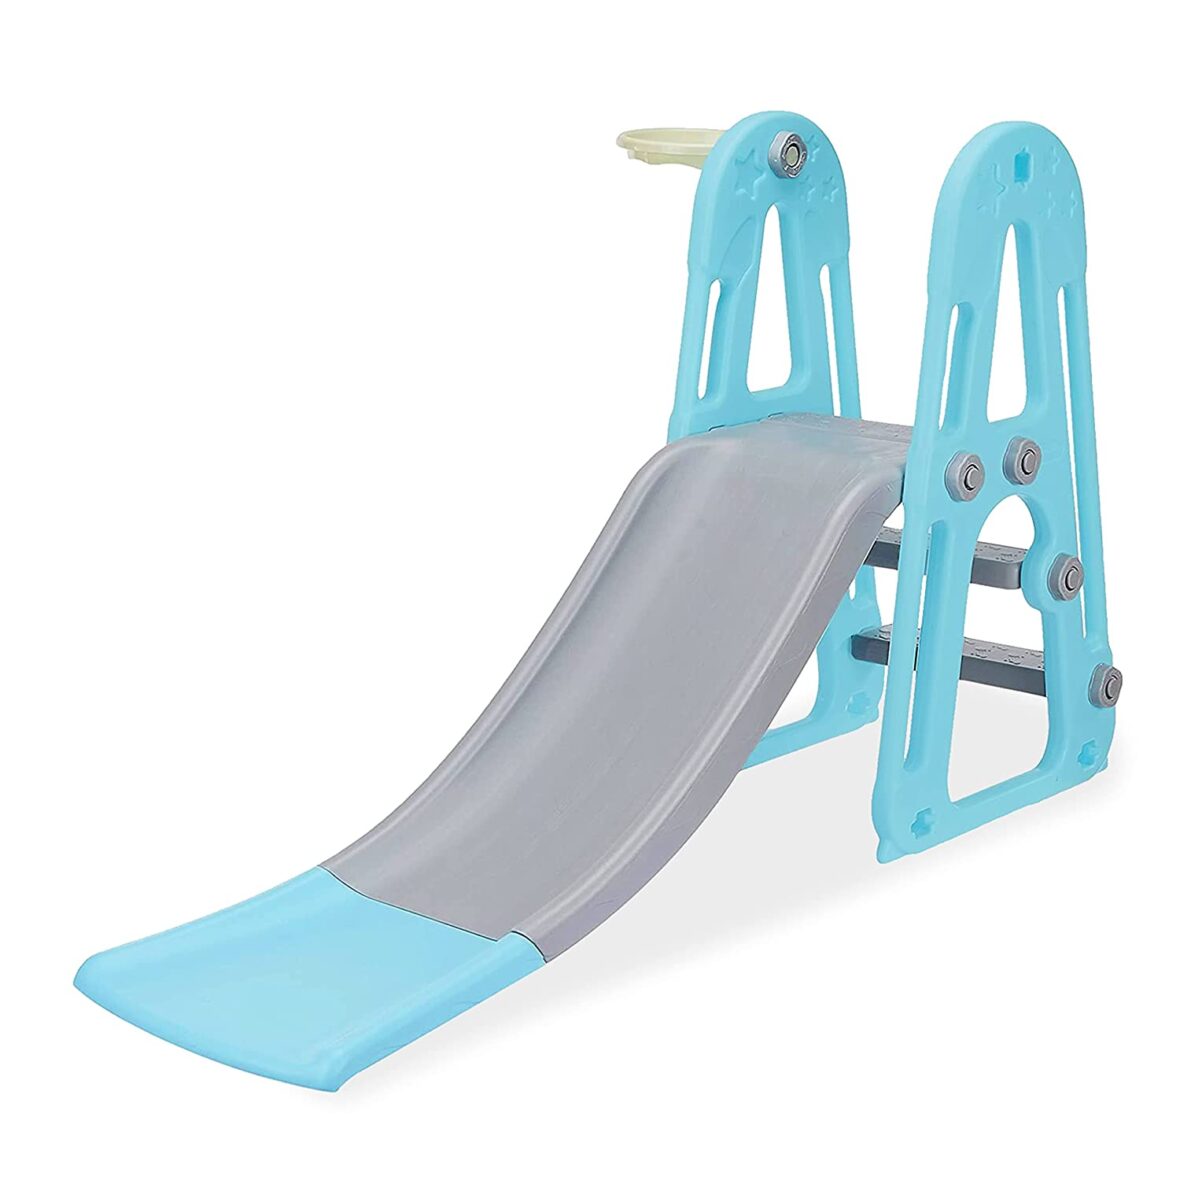 U Smile Garden Slide for Kids – Playgro Super Prime Slider with Extended Buffer -For Boys and Girls Perfect Slides / Toys for Home, Indoor or Outdoor 1 Year to 5 Years – L140 x B62 x H85 cms (Super Slider)